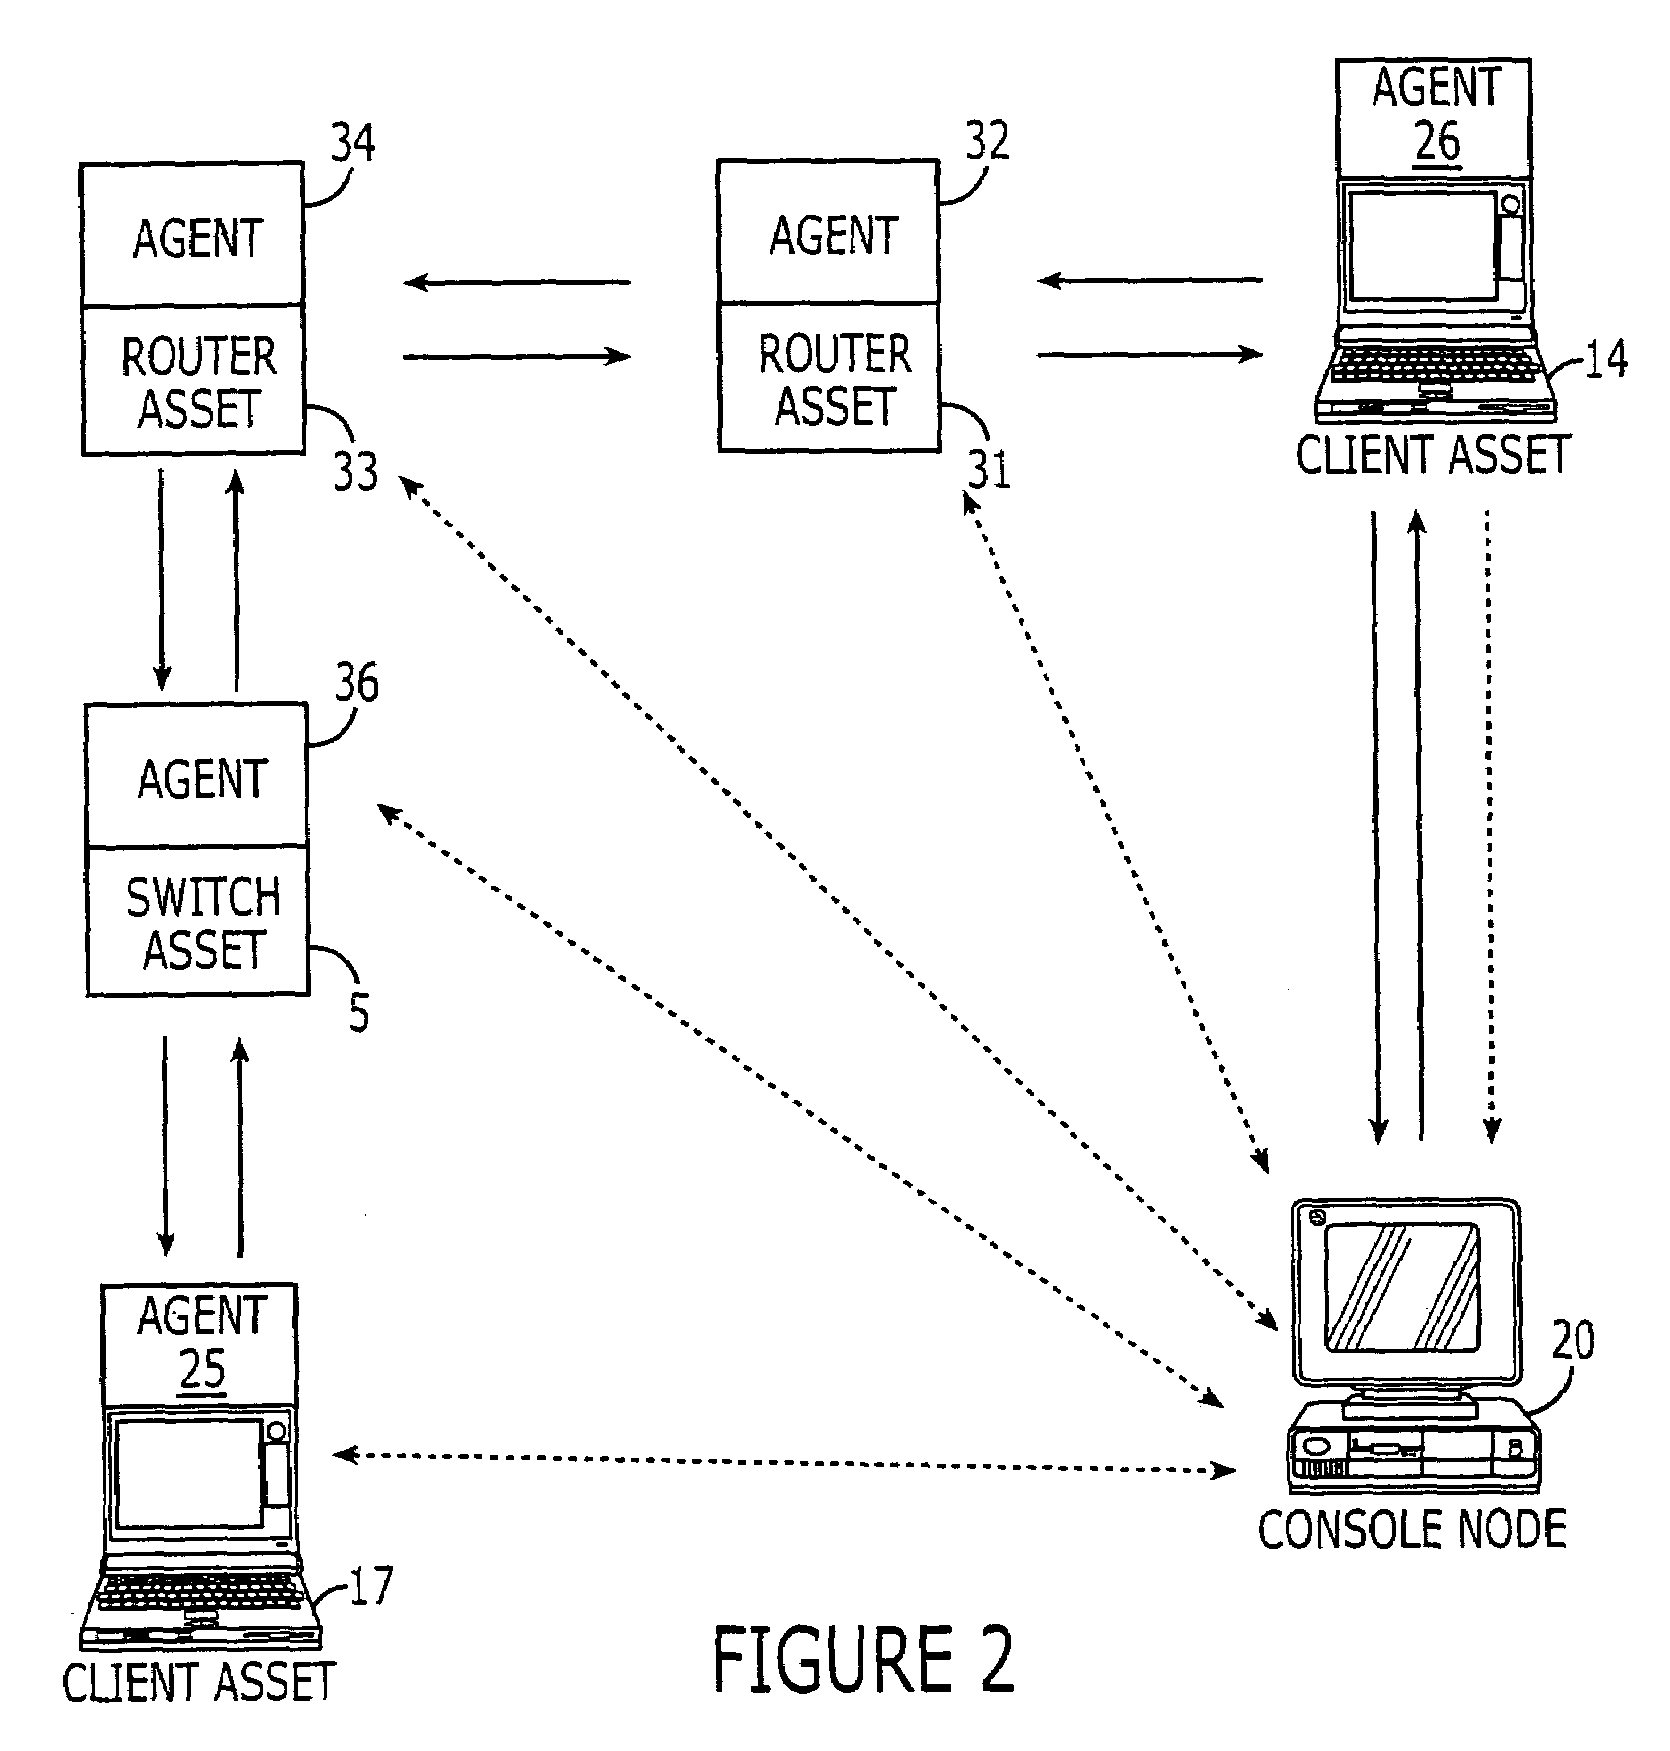 Methods, systems and computer program products for evaluating security of a network environment